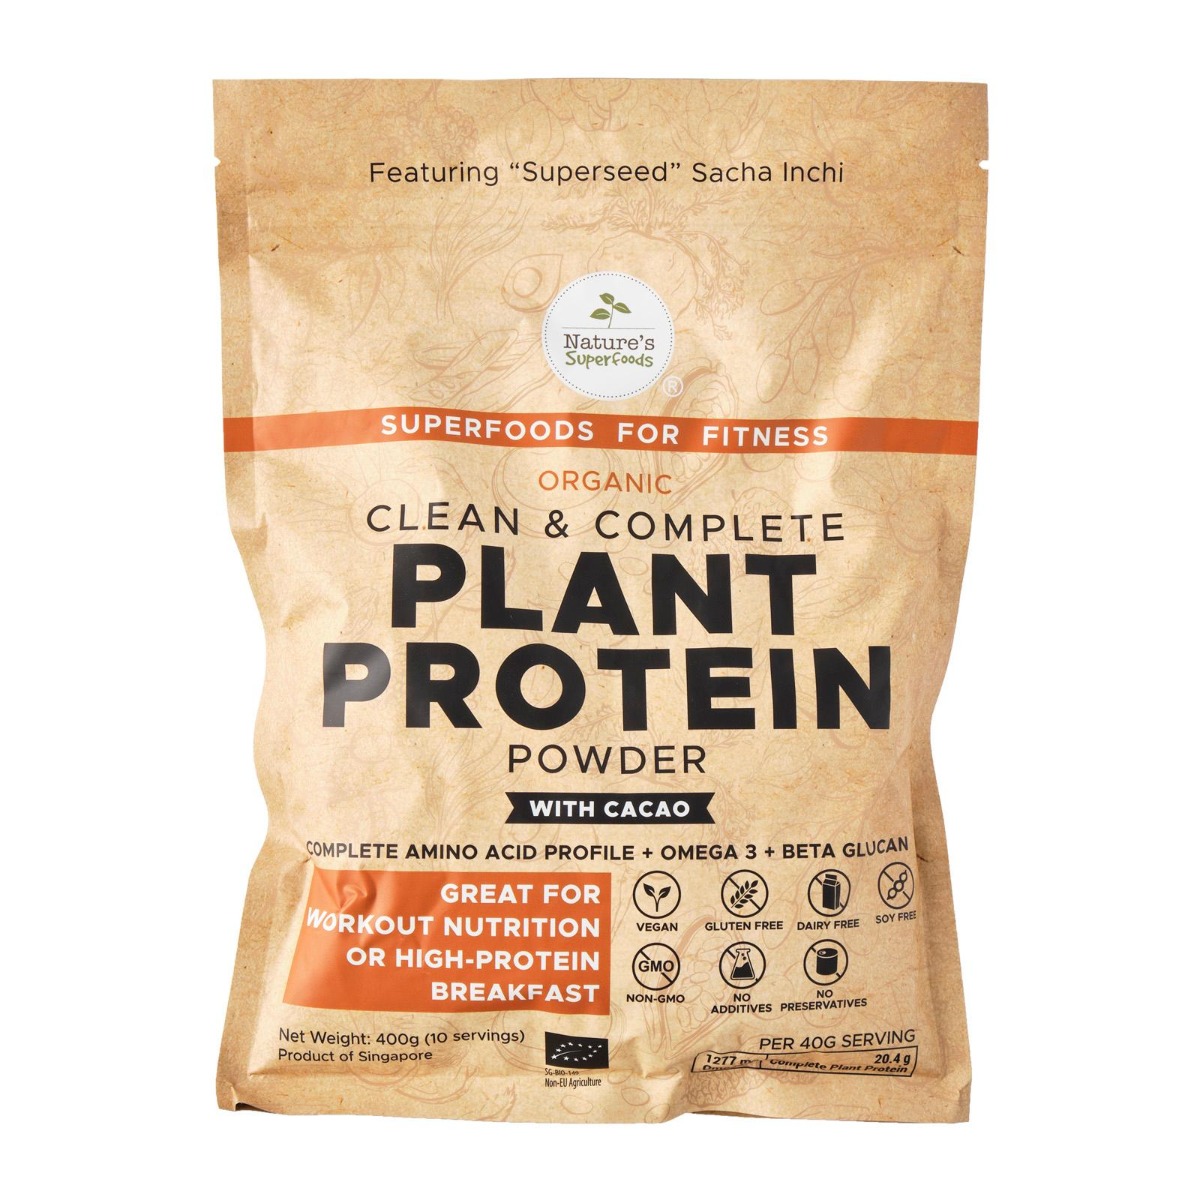 Organic Plant Protein Powder (with Cacao) - 400g resealable pack front